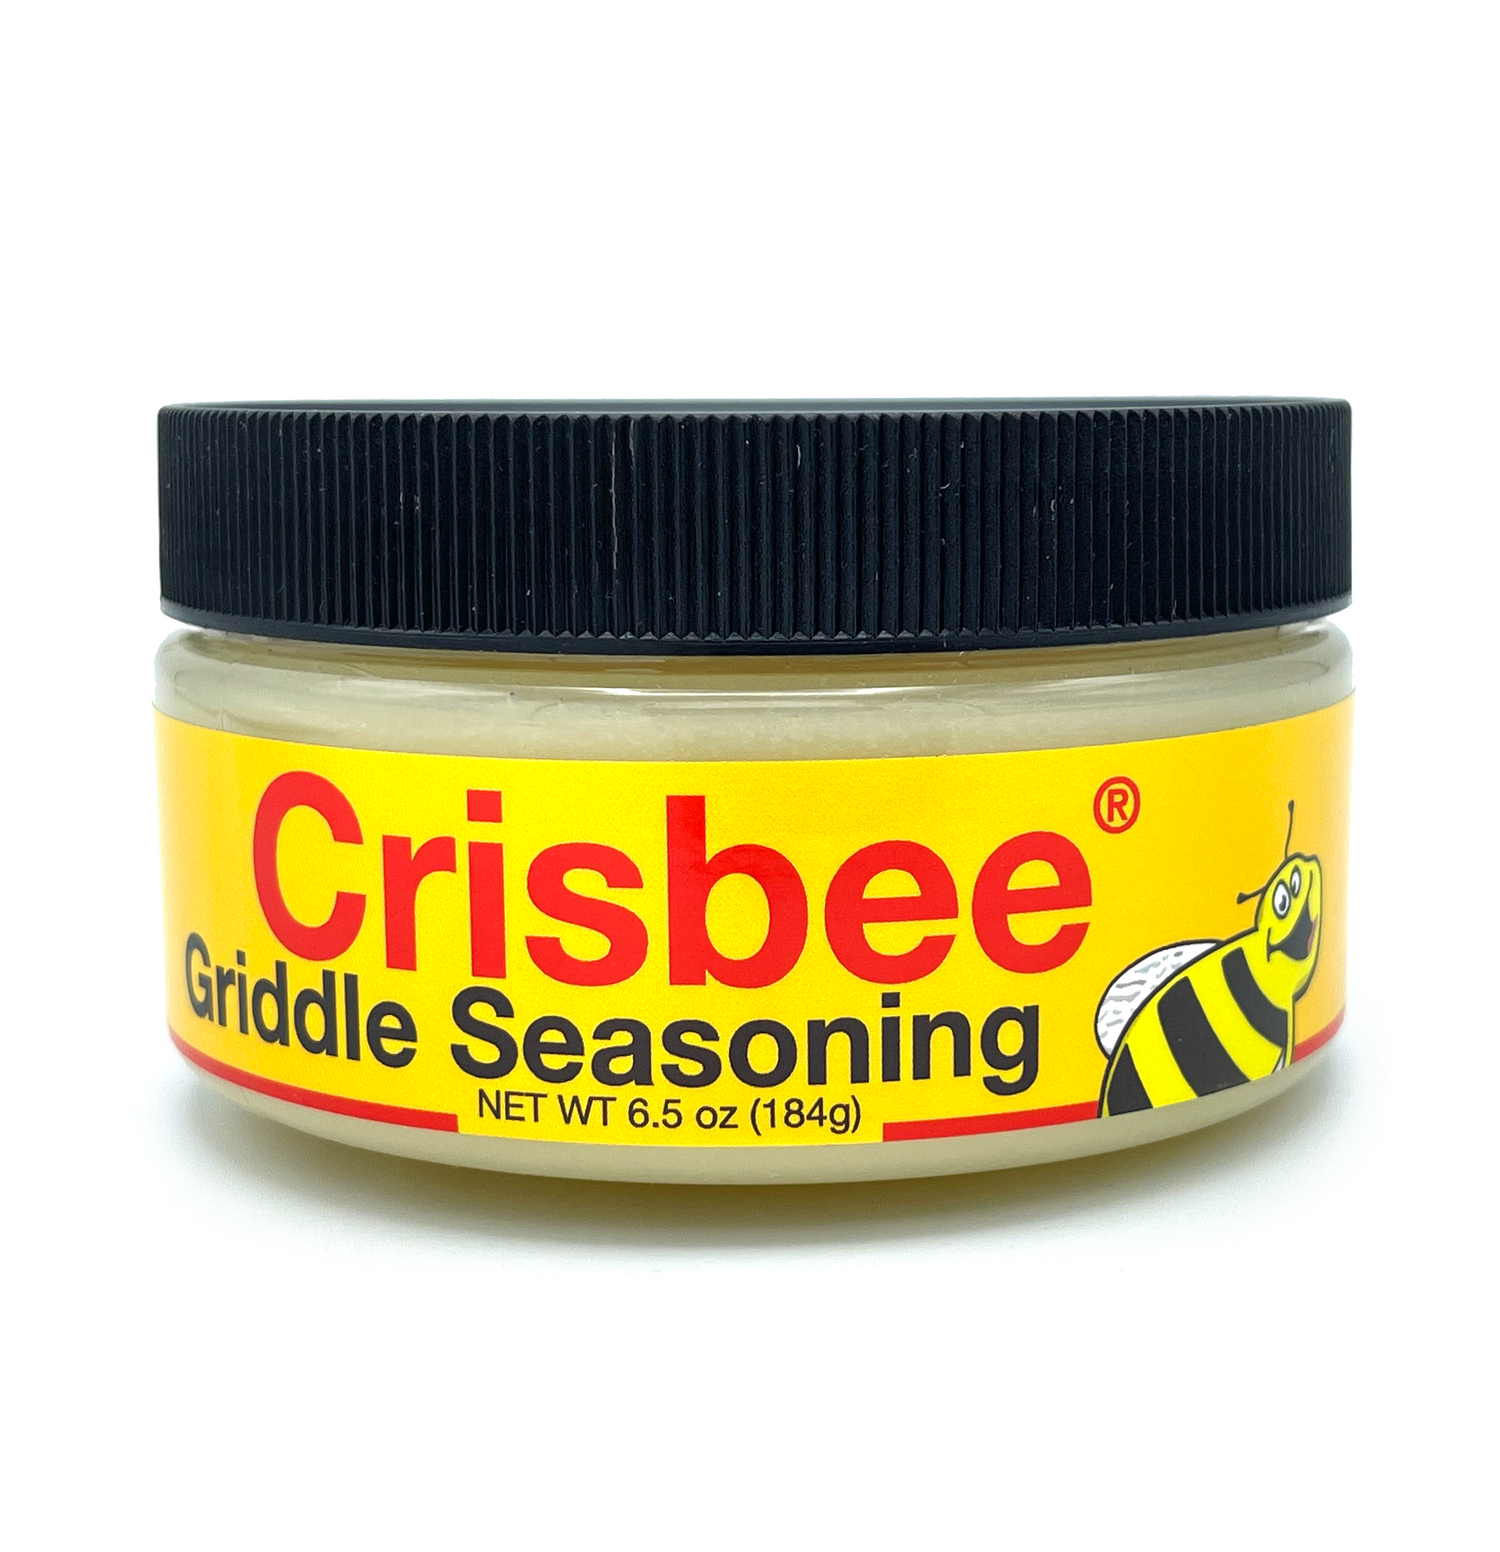 Crisbee Stik & Crisbee Puck Cast Iron and Carbon Steel Seasoning Combo -  Family Made in USA - The Cast Iron Seasoning Oil & Conditioner Preferred by